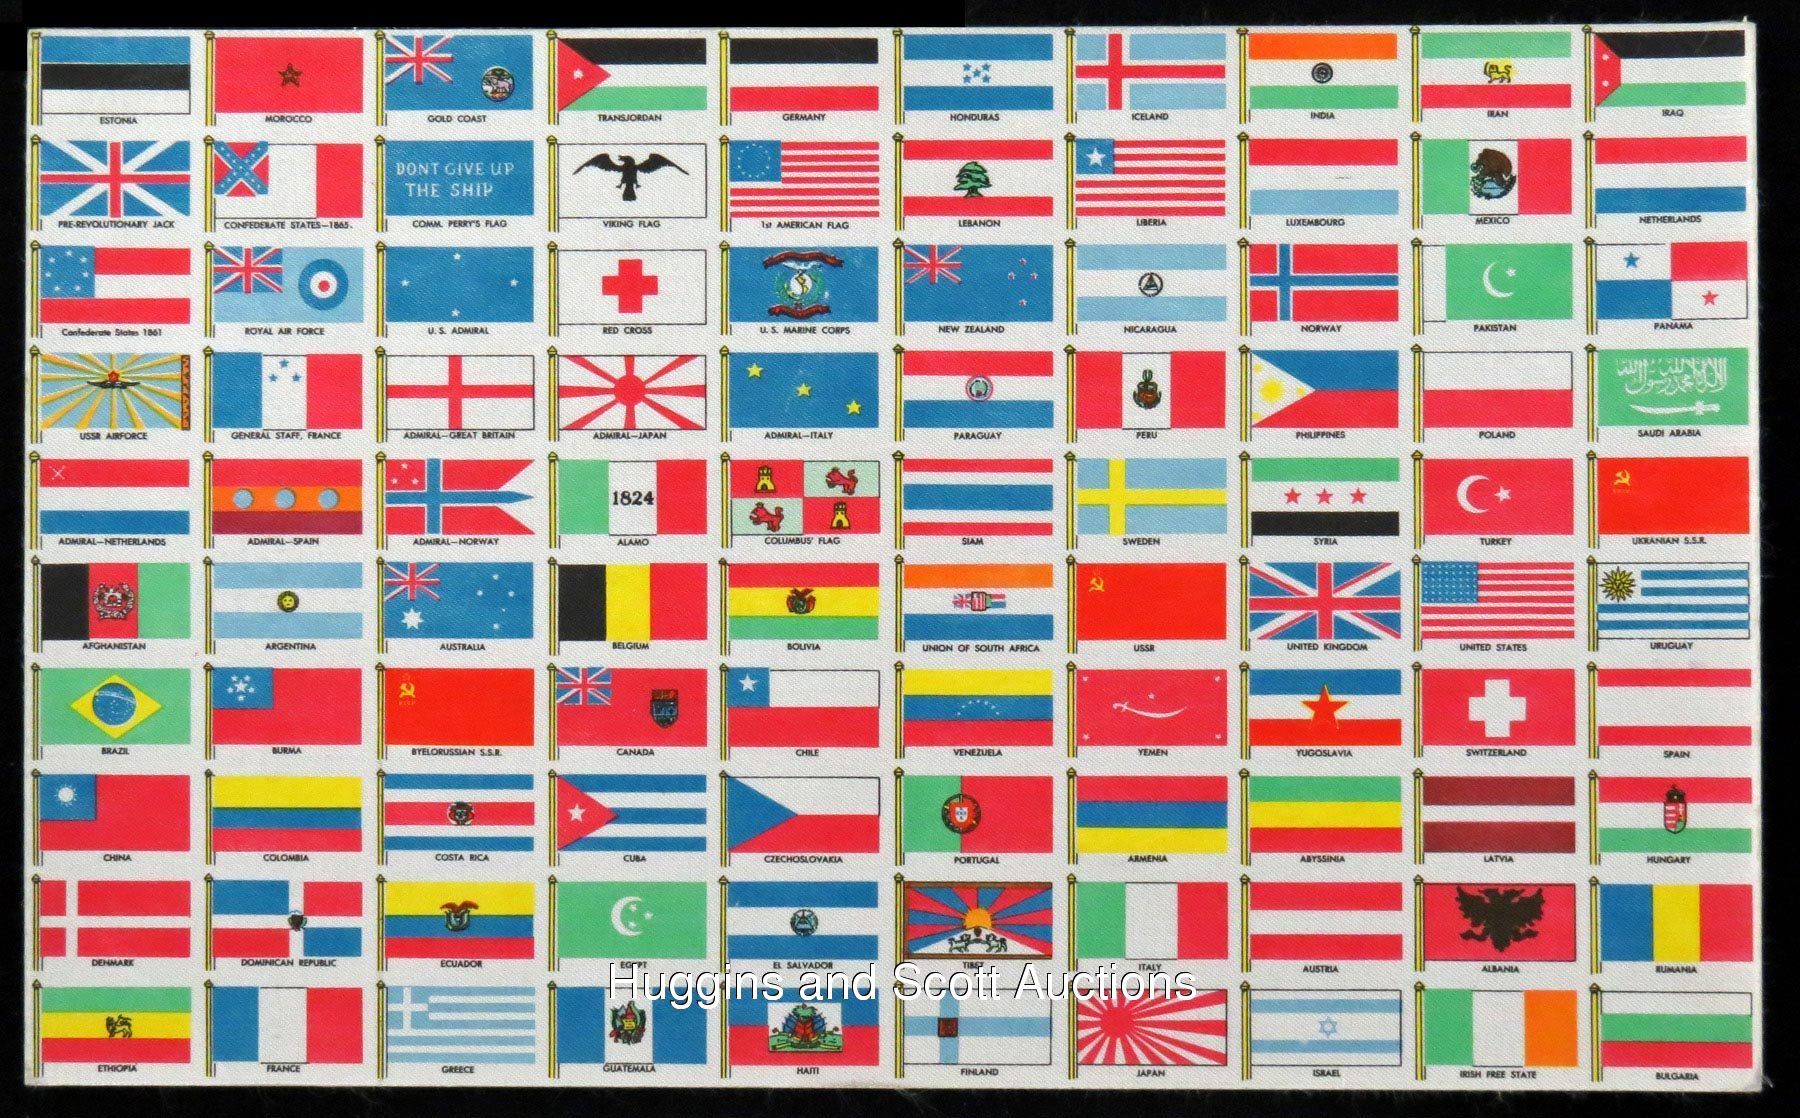 UCS 1949 Topps Flags of All Nations.jpg